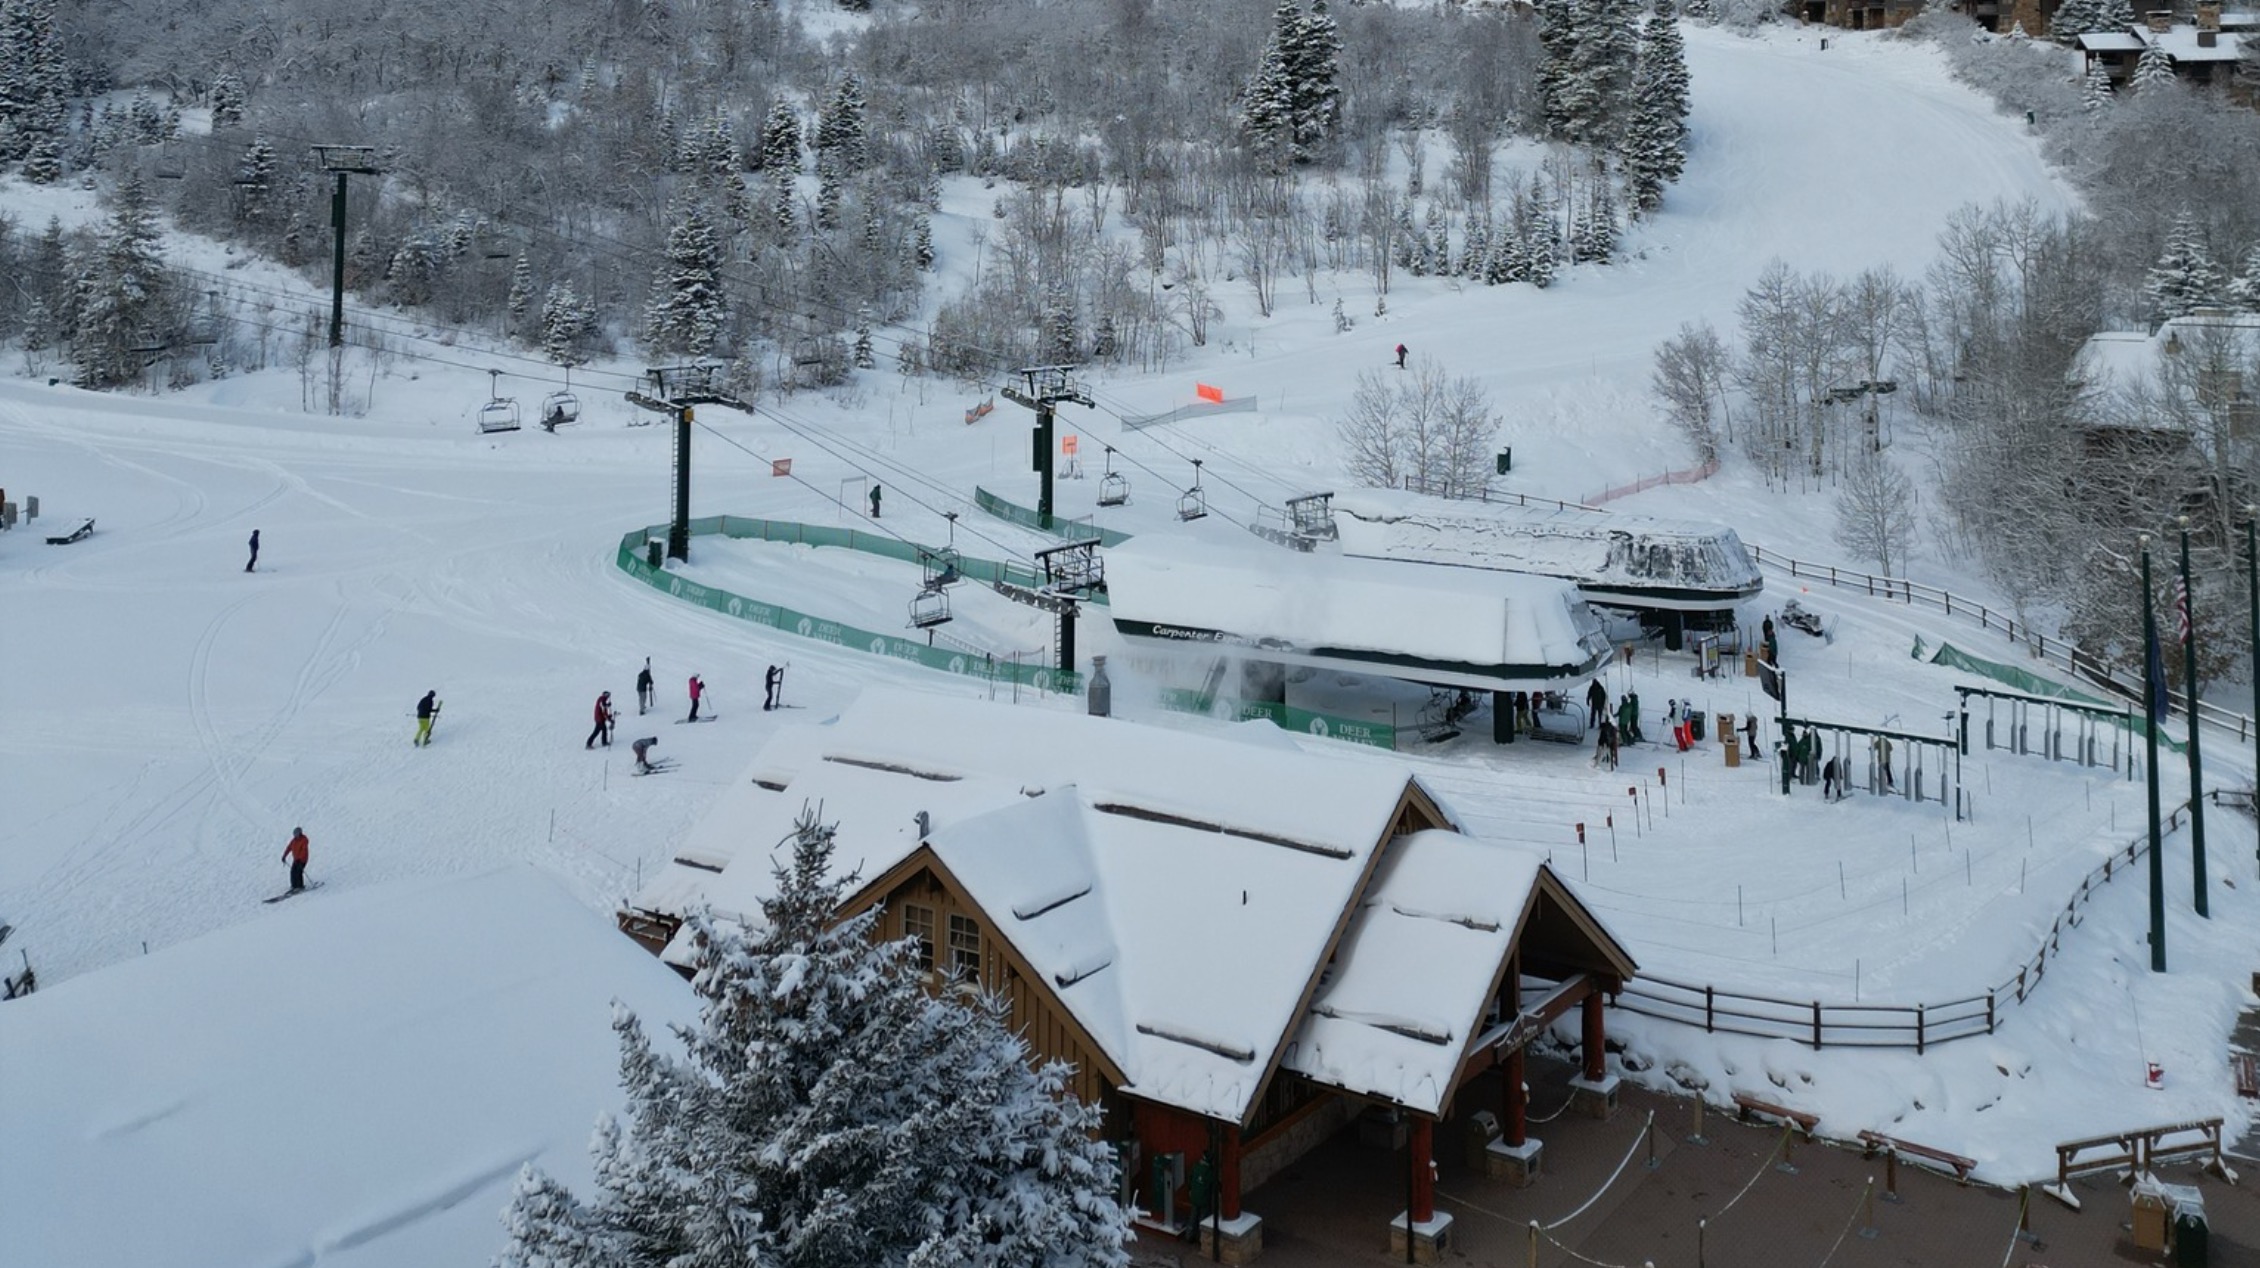 Utah Ski Lift Accident Reports Are Now Available To The Public